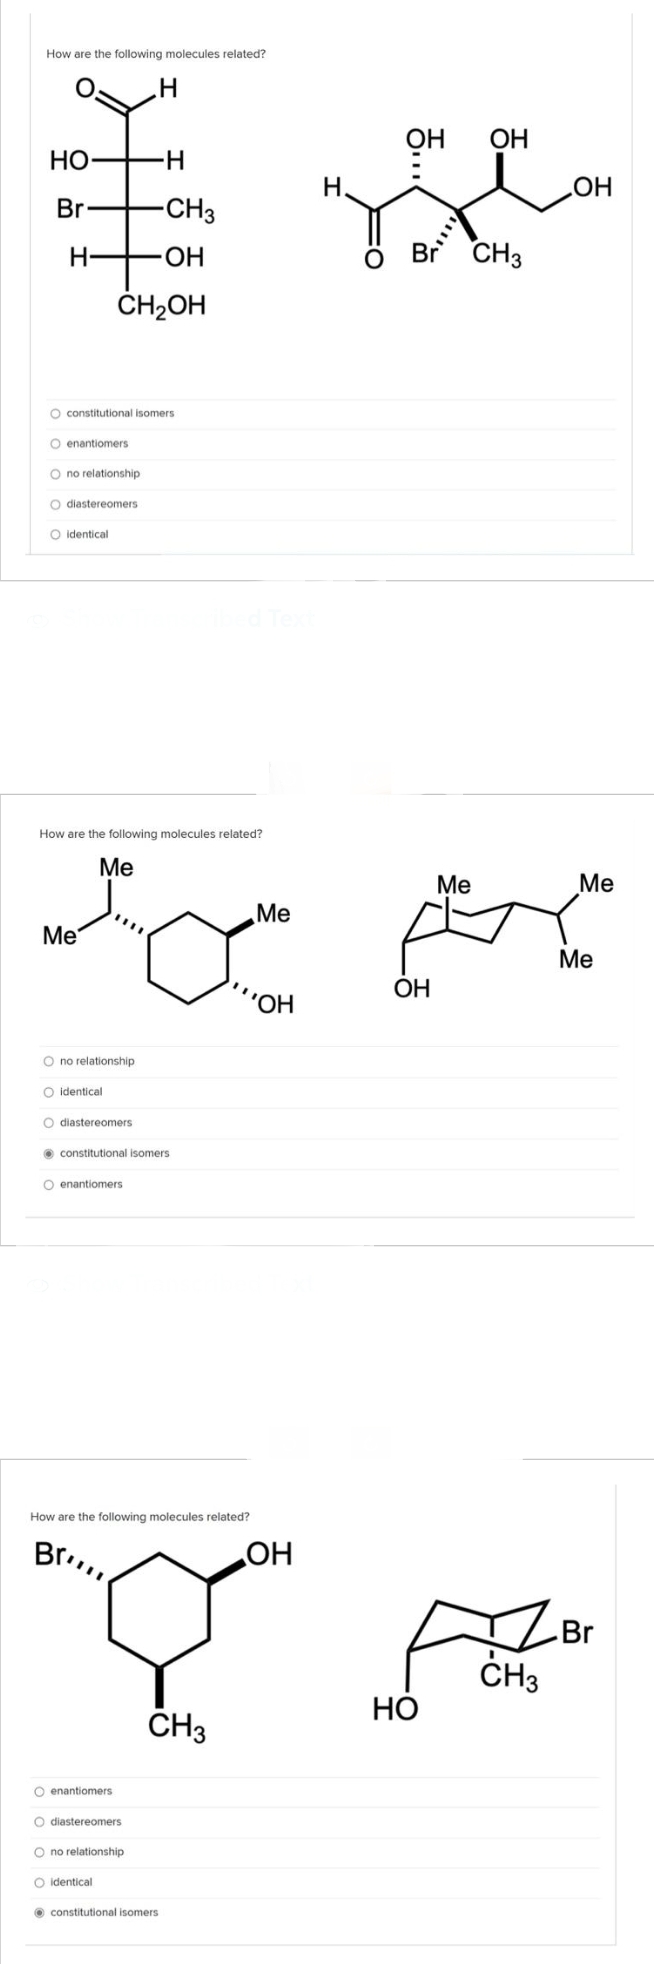 How are the following molecules related?
HO
Br
H
0 0 0 0 0
O constitutional isomers.
O enantiomers
O no relationship
O diastereomers
O identical
-H
-CH3
OH
CH₂OH
O no relationship
O identical
M
O diastereomers
O enantiomers
ο ο ο
constitutional isomers.
O enantiomers
H
O diastereomers
O no relationship
O identical
How are the following molecules related?
Me
Me
to pre
Me
Me
OH
ribed Text
constitutional isomers
Me
H.
'OH
5...
OH
OH
How are the following molecules related?
Brill
OH
Br
Y A
CH3
HO
CH3
Br CH3
OH
Me